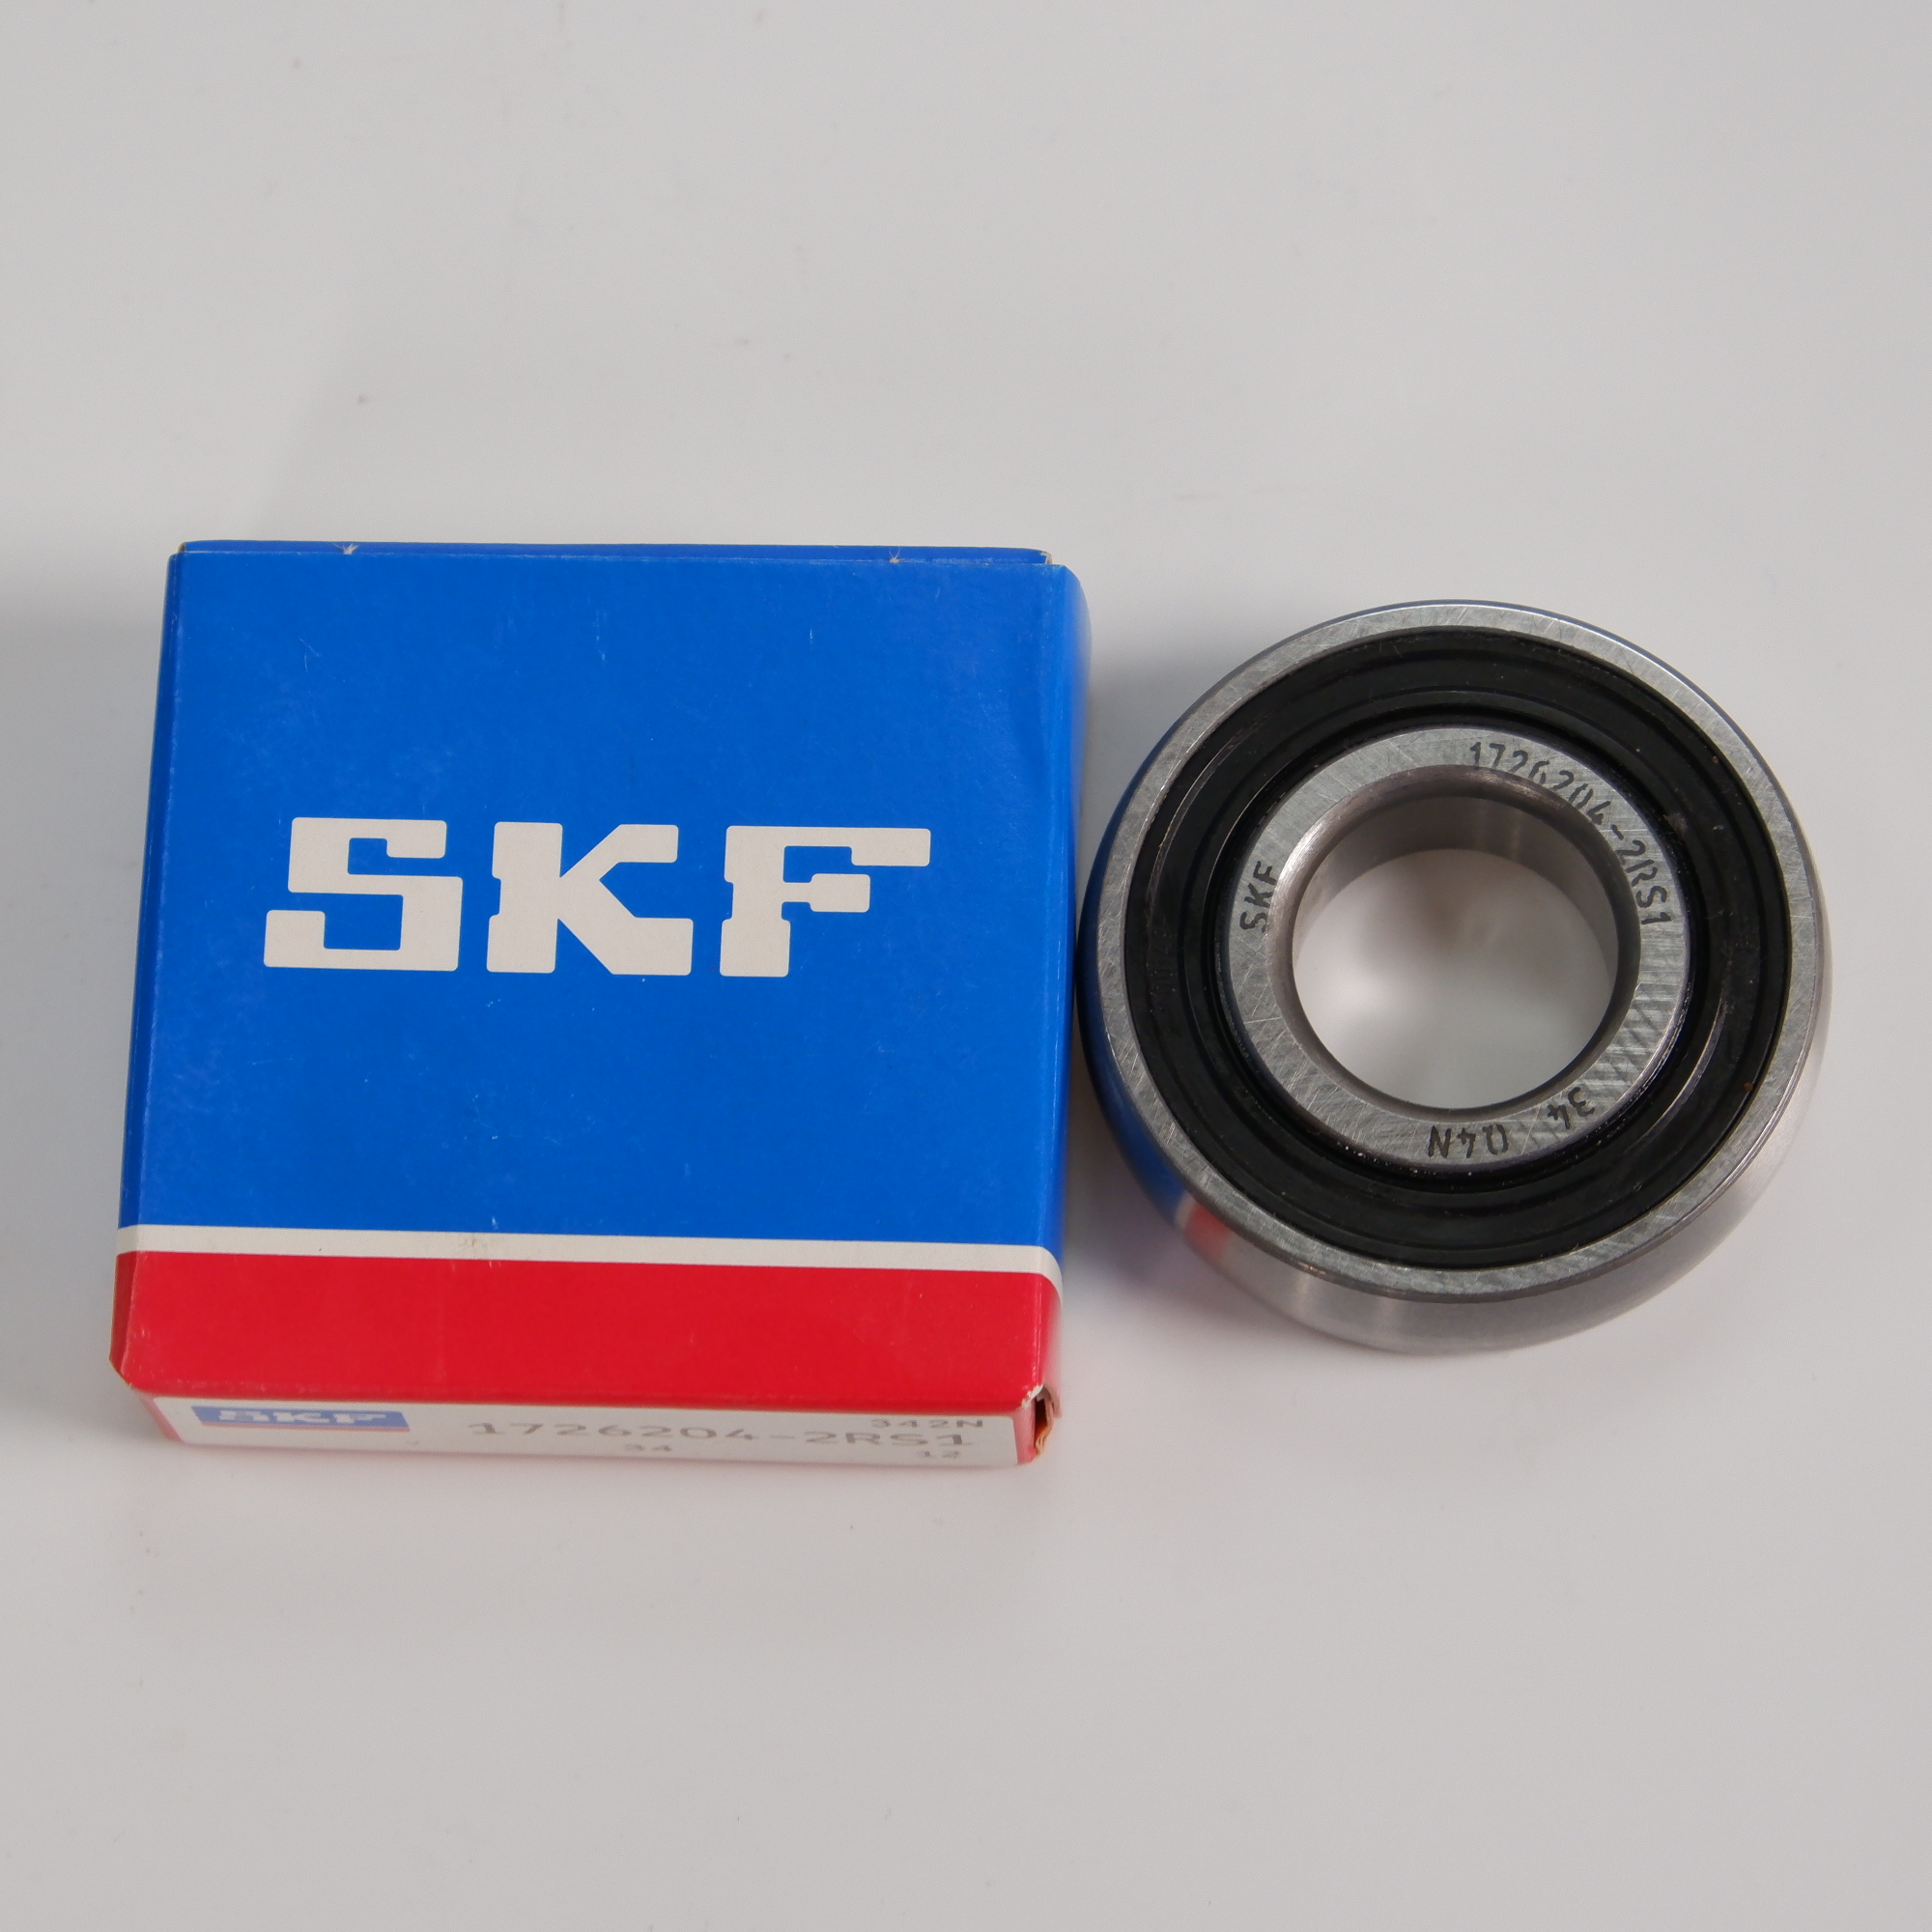   SKF 1726204-2RS1